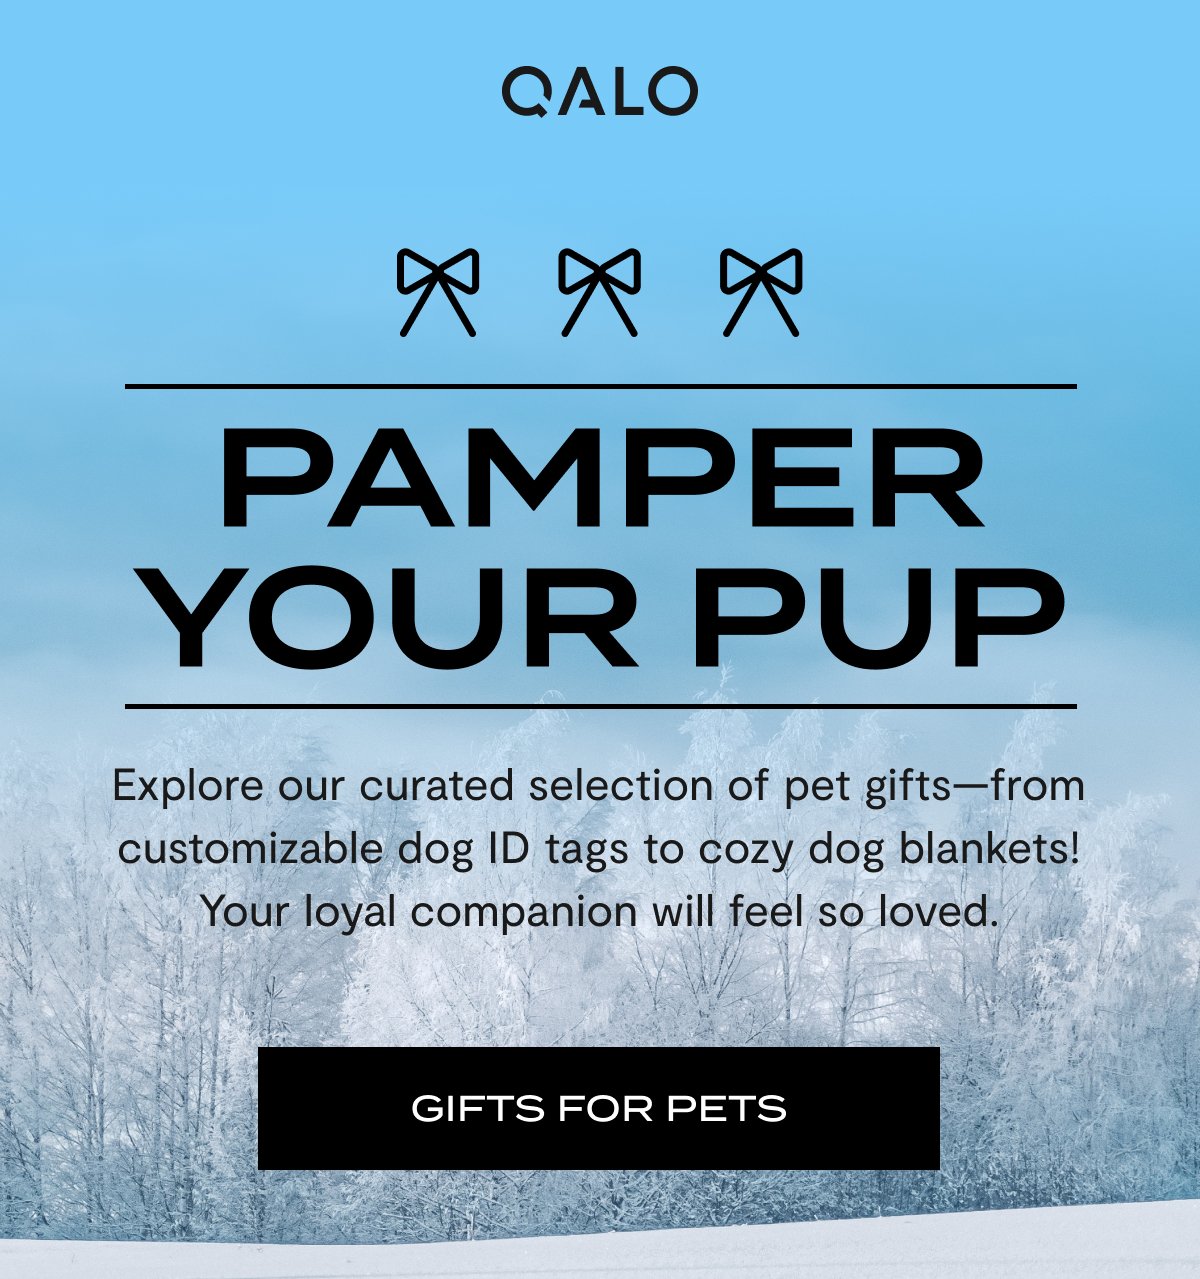 QLO.HolidayGiftGuide.Retention.Email.12.09.23.GiftsForPets- 1.jpg